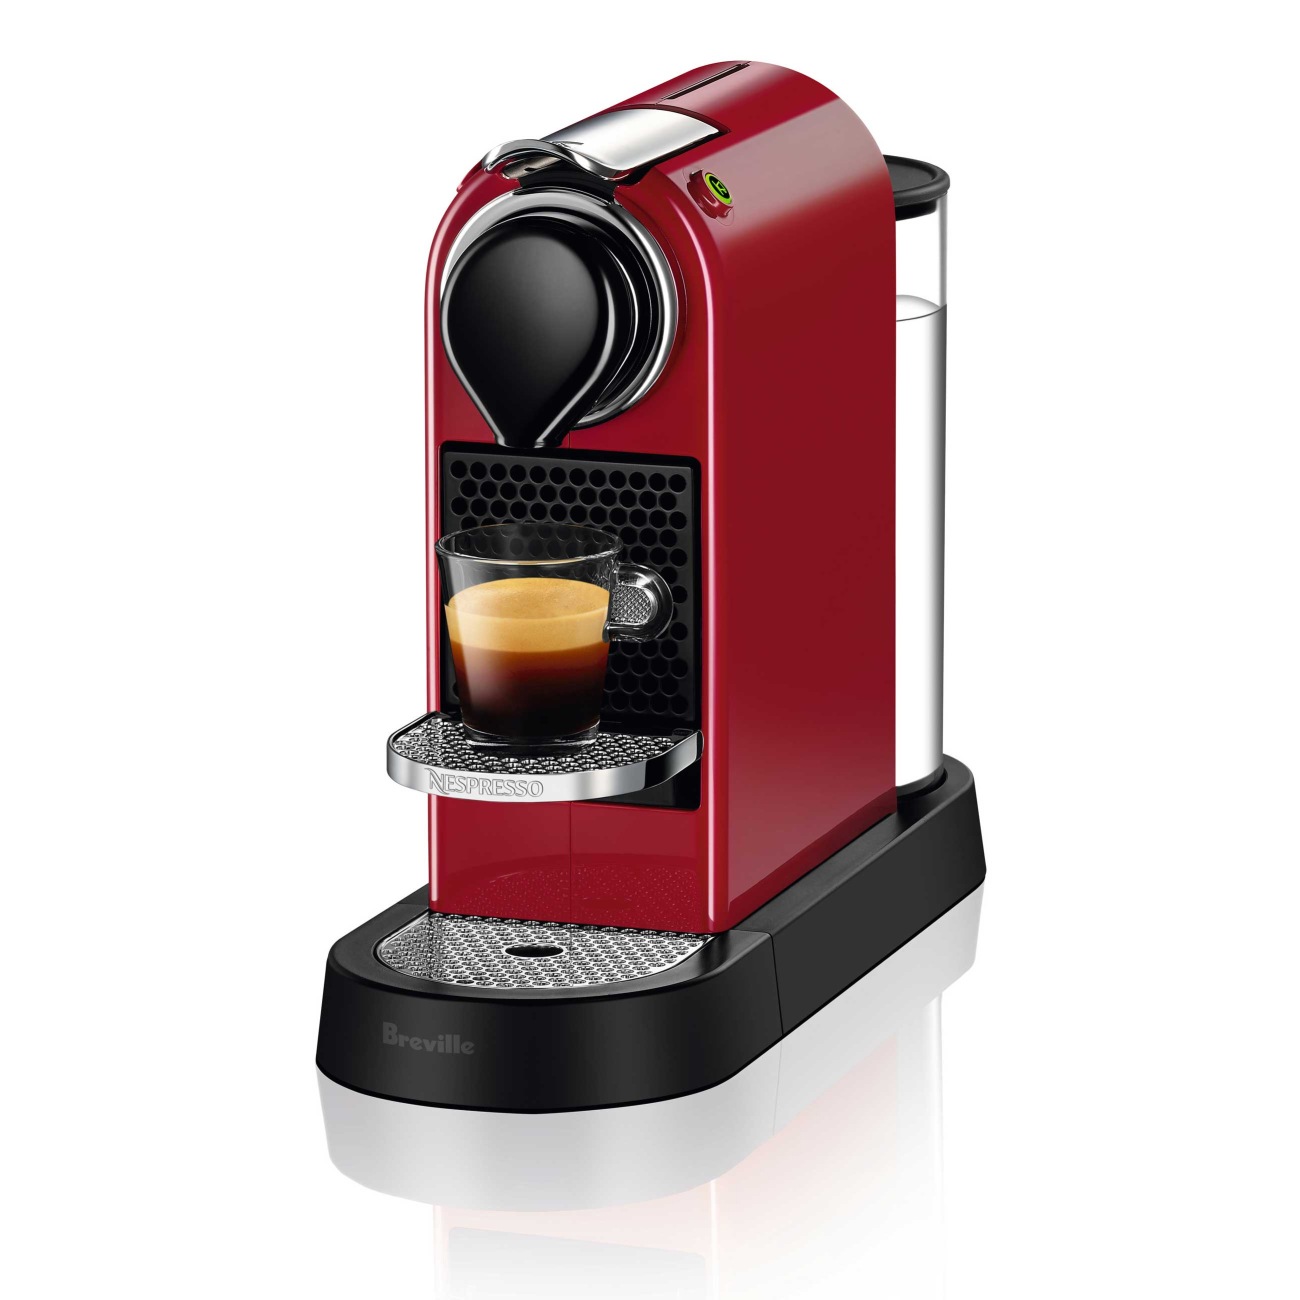 https://www.breville.com/content/dam/breville/ca/catalog/products/images/bec/bec620red1auc1/pdp.jpg?pdp